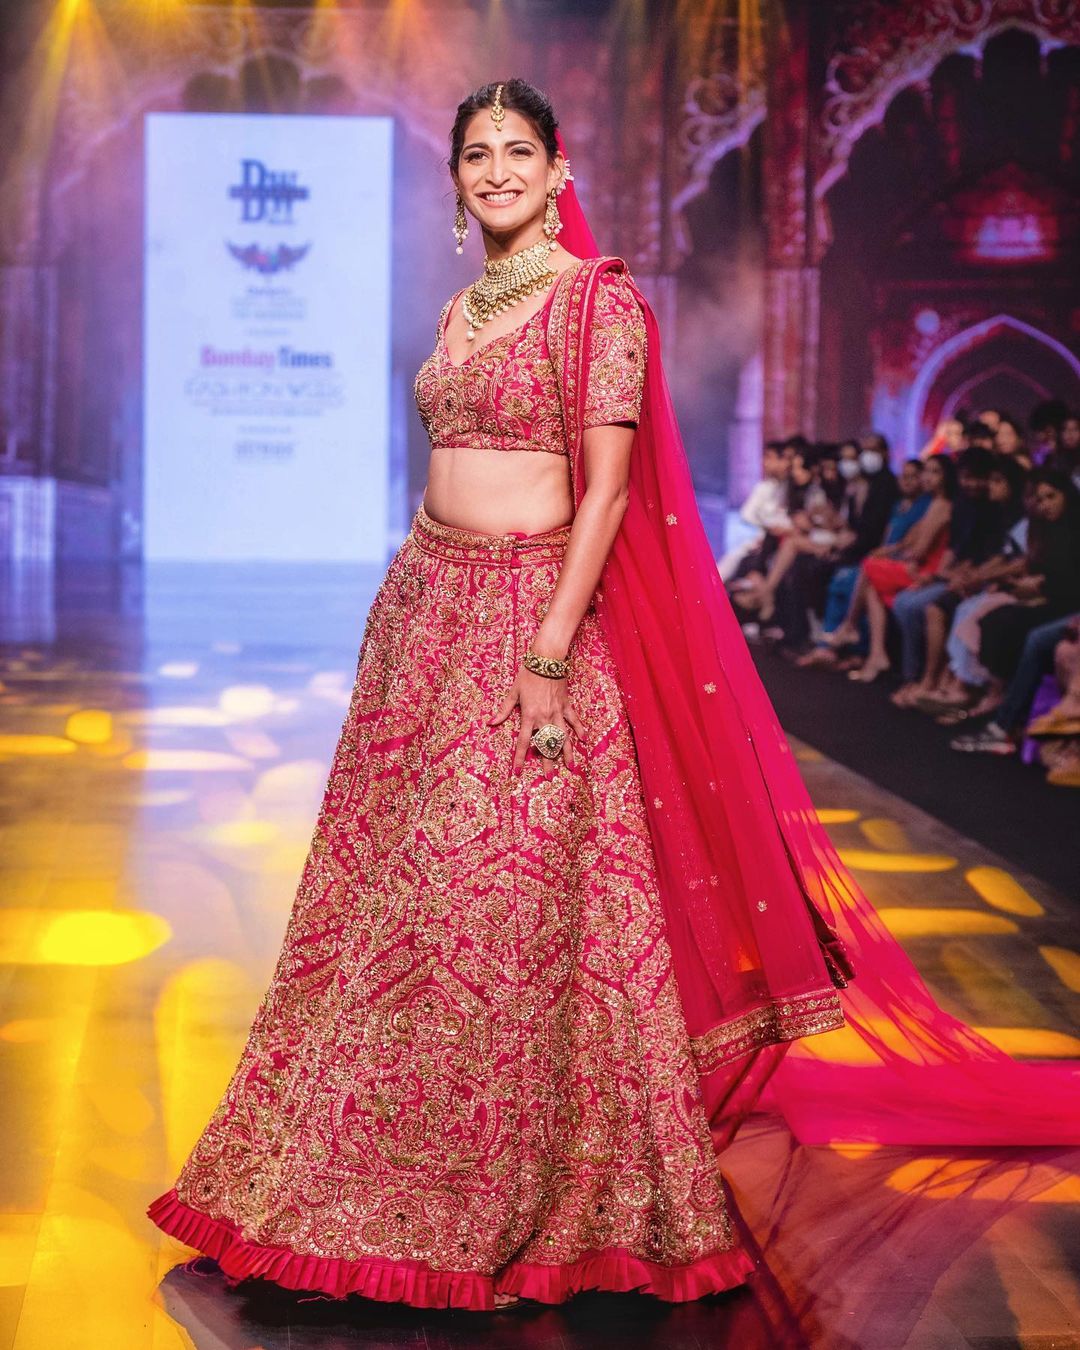 Gorgeous Aahana Kumra In Beautiful Pink Bridal Lehenga Outfit Latest and Chic Outfit Looks By Aahana Kumra